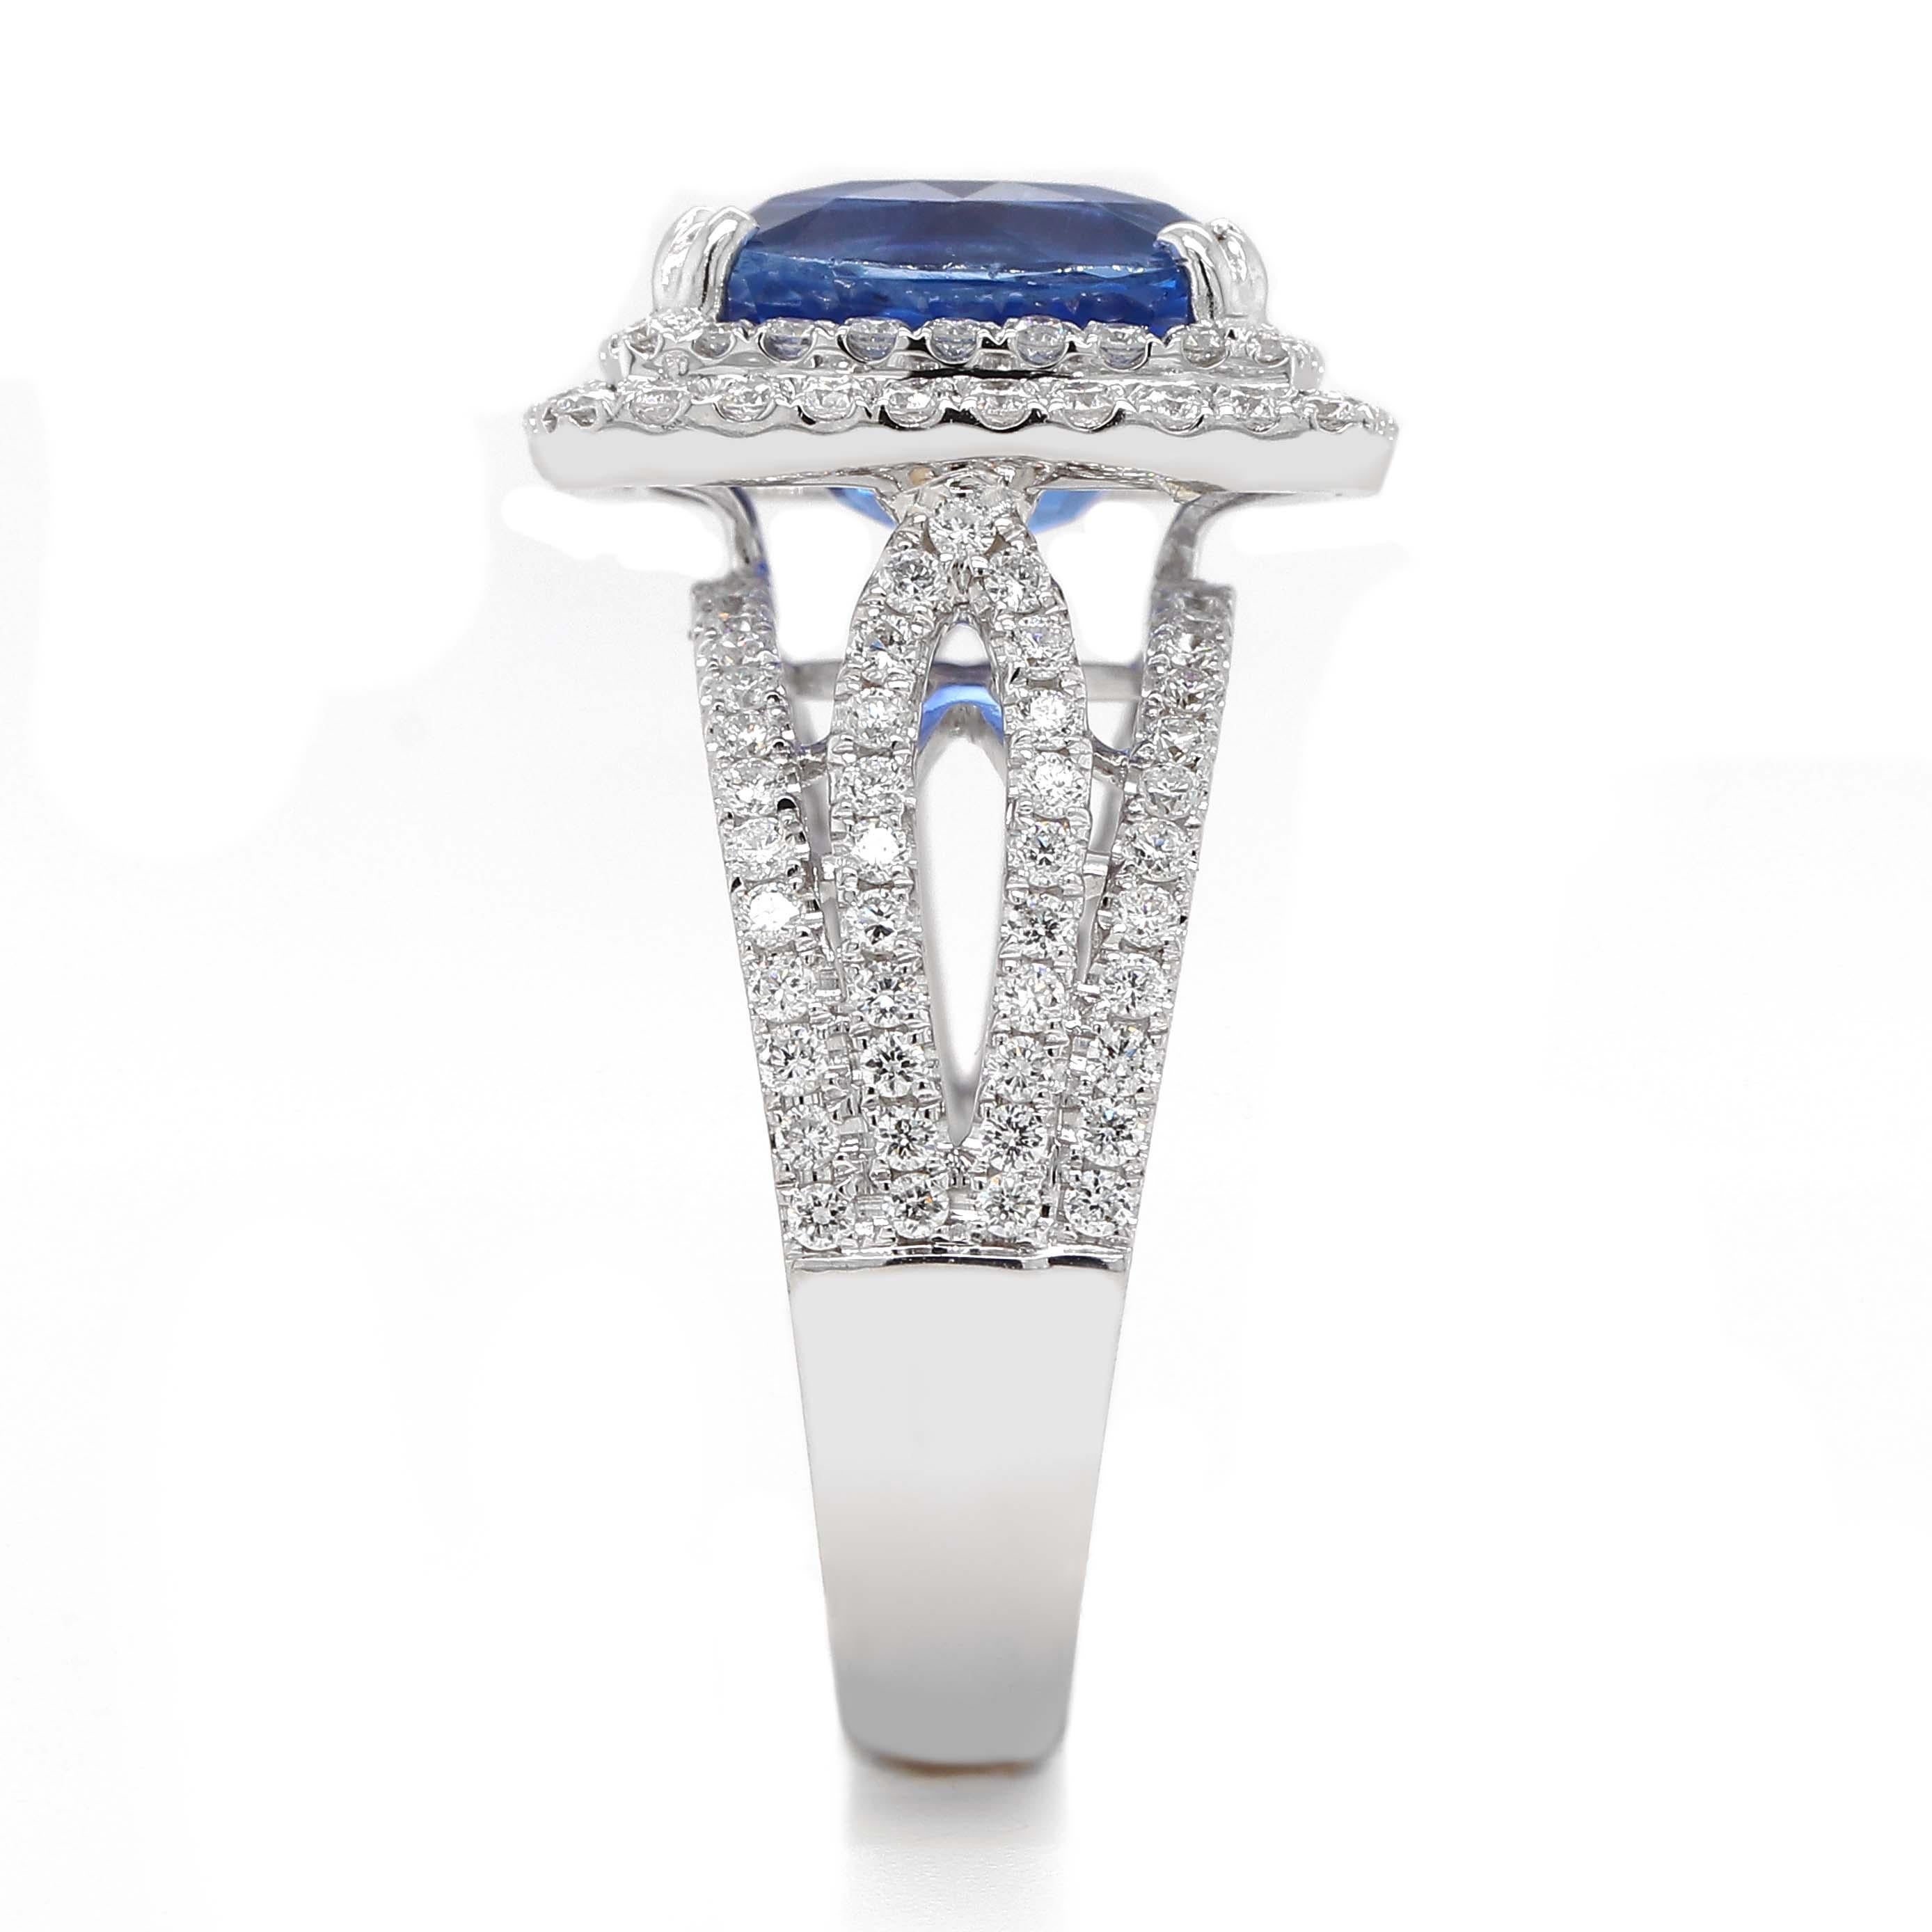 4.27 Carat Cushion Sapphire Ring in 18k White Gold In New Condition For Sale In Houston, TX